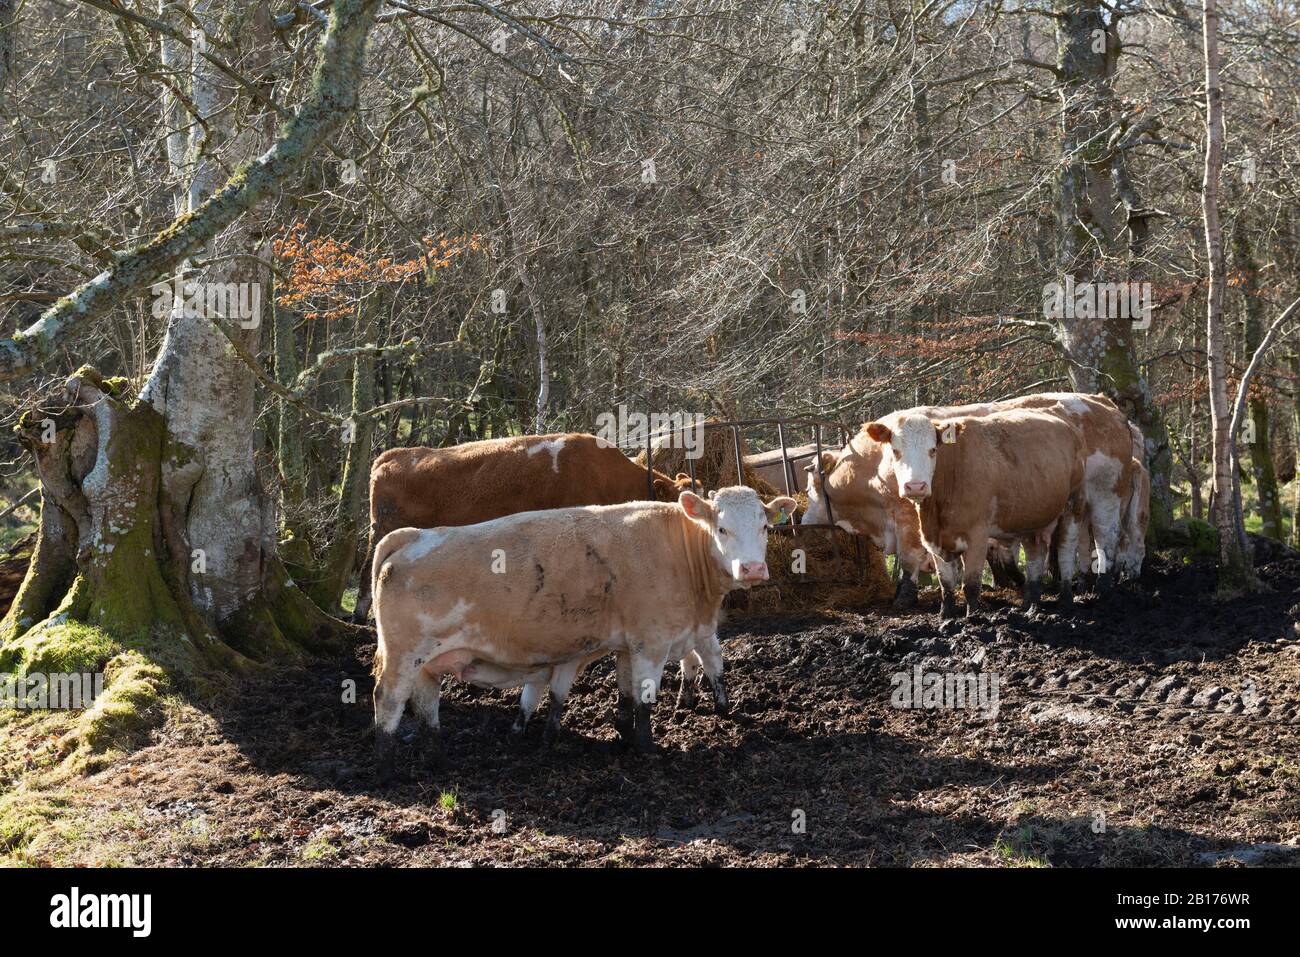 A Small Herd of Cows Take Hay From a Feeder in Amongst Silver Birch (Betula Pendula) and Beech (Fagus Sylvatica) Trees Stock Photo